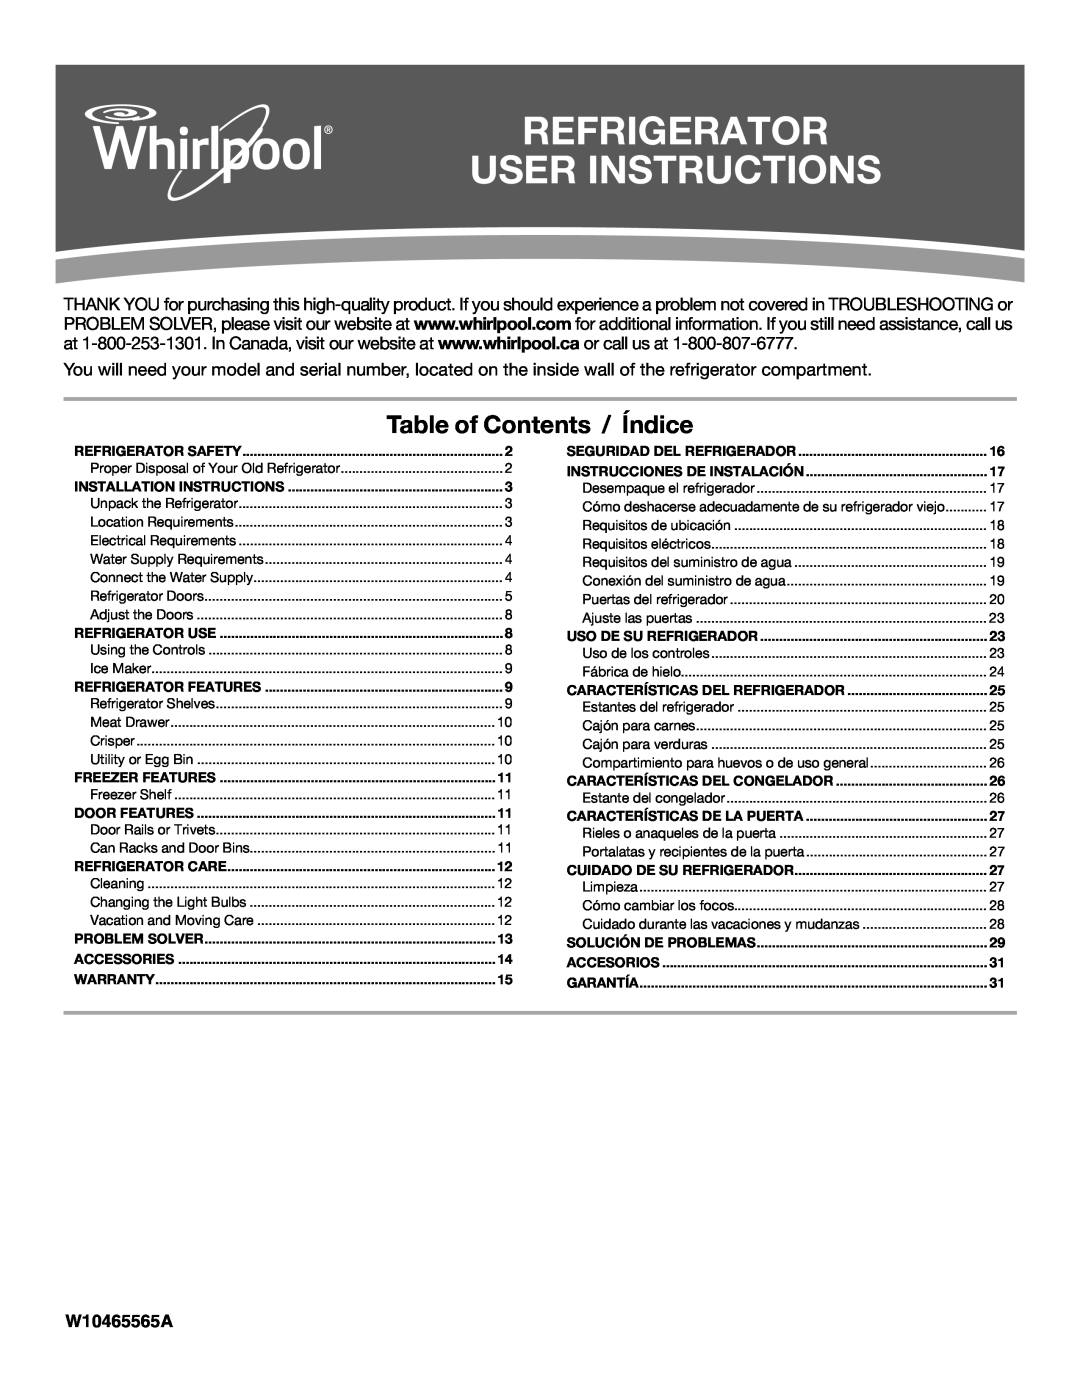 Whirlpool WRT111SFAF installation instructions Refrigerator User Instructions, Table of Contents / Índice, W10465565A 